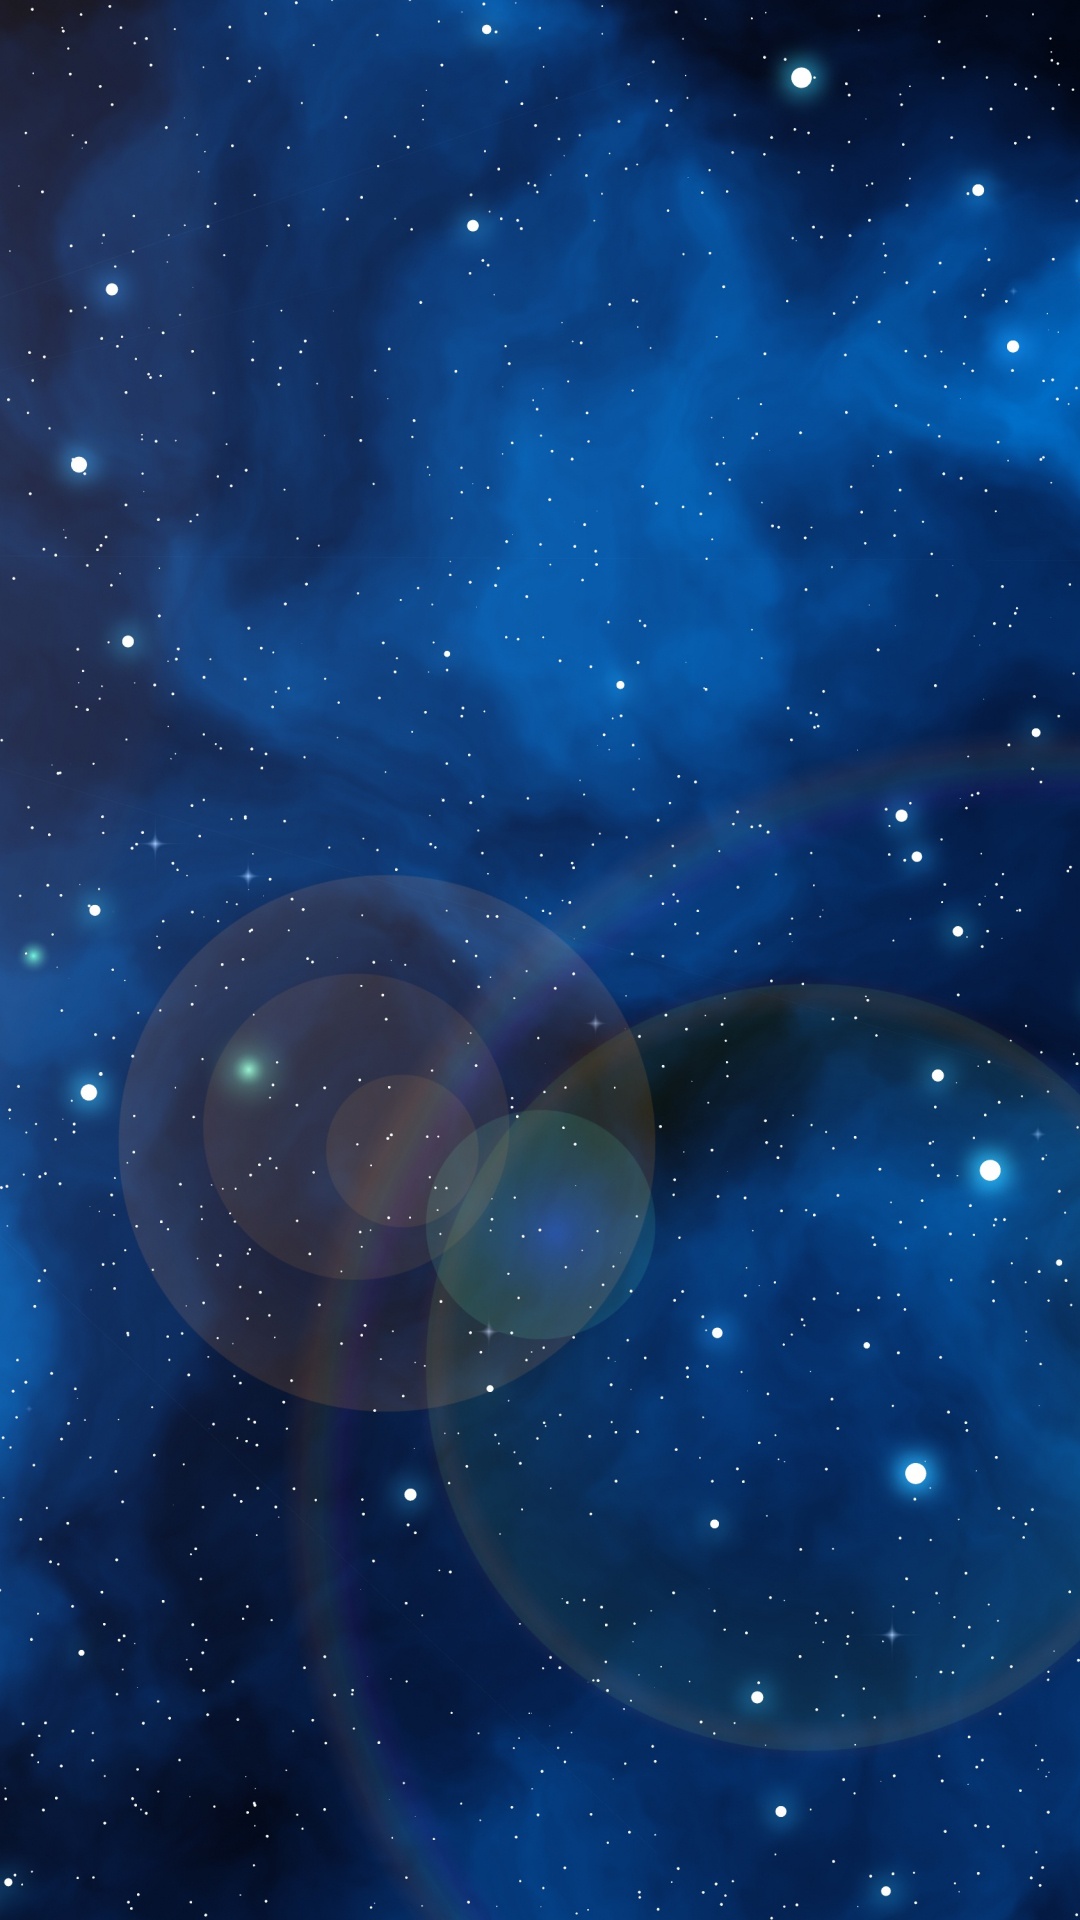 Blue and White Galaxy Illustration. Wallpaper in 1080x1920 Resolution